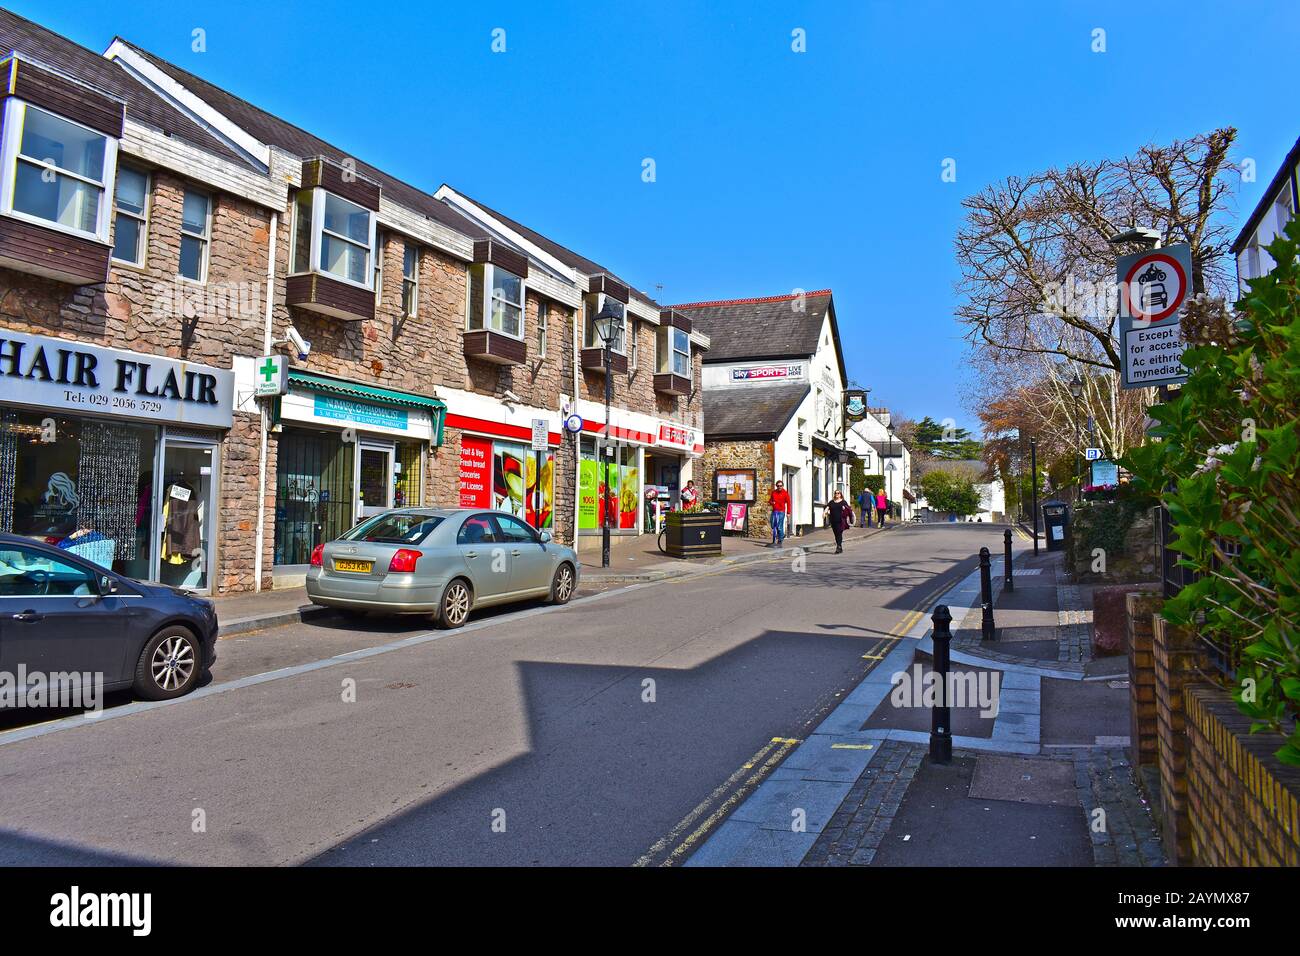 A general street view of the High Street in the Village of Llandaff, with a mix of small retail shops, cafés & restaurants. Shoppers cars parked. Stock Photo